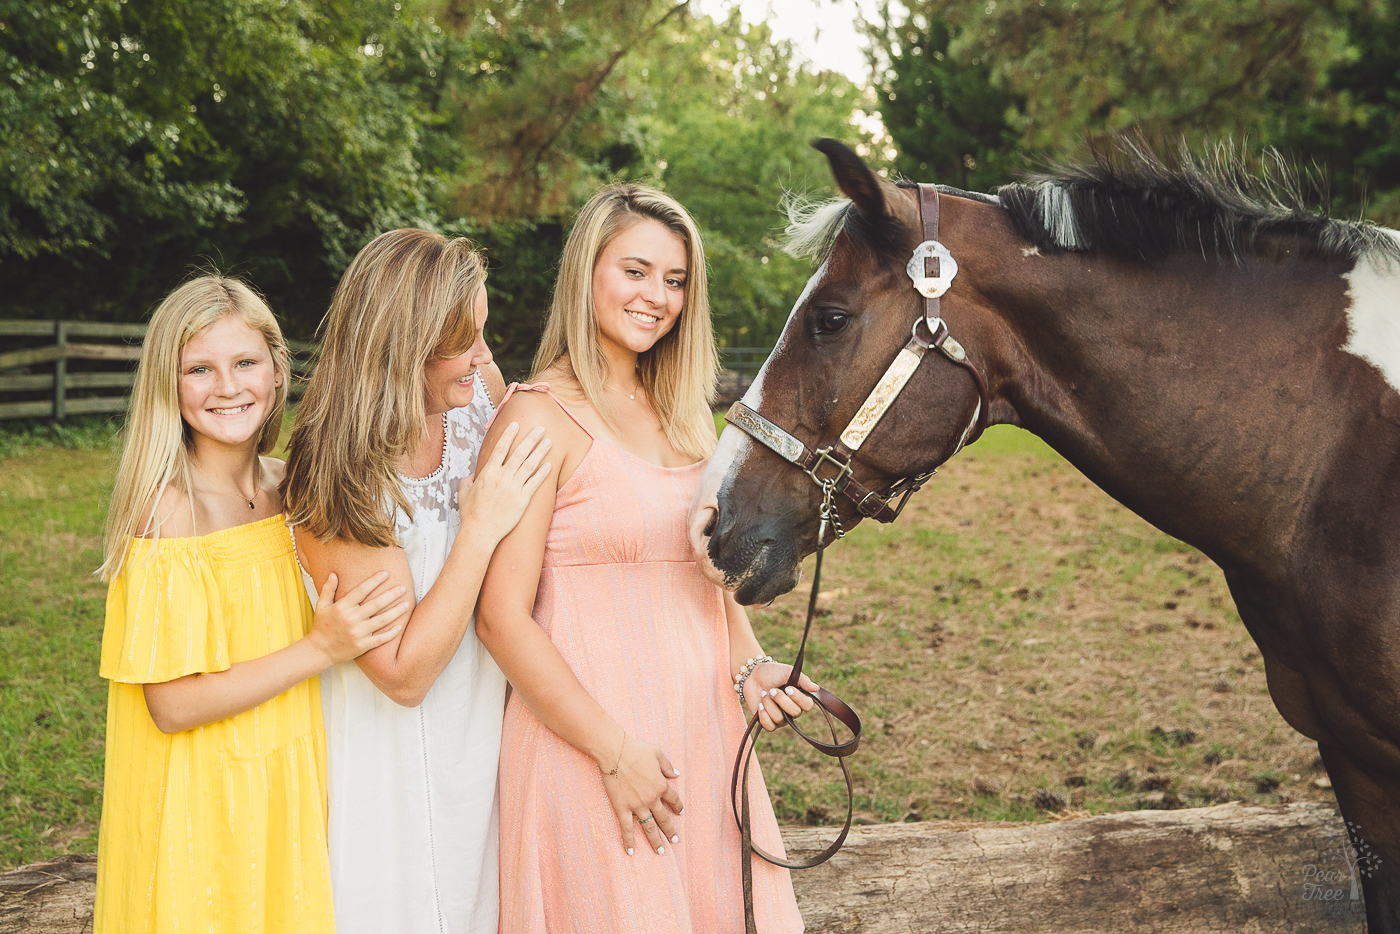 Little sister in yellow dress holding her mom's arm. Mom is smiling at horse and has her hand on her high school senior daughter's shoulder